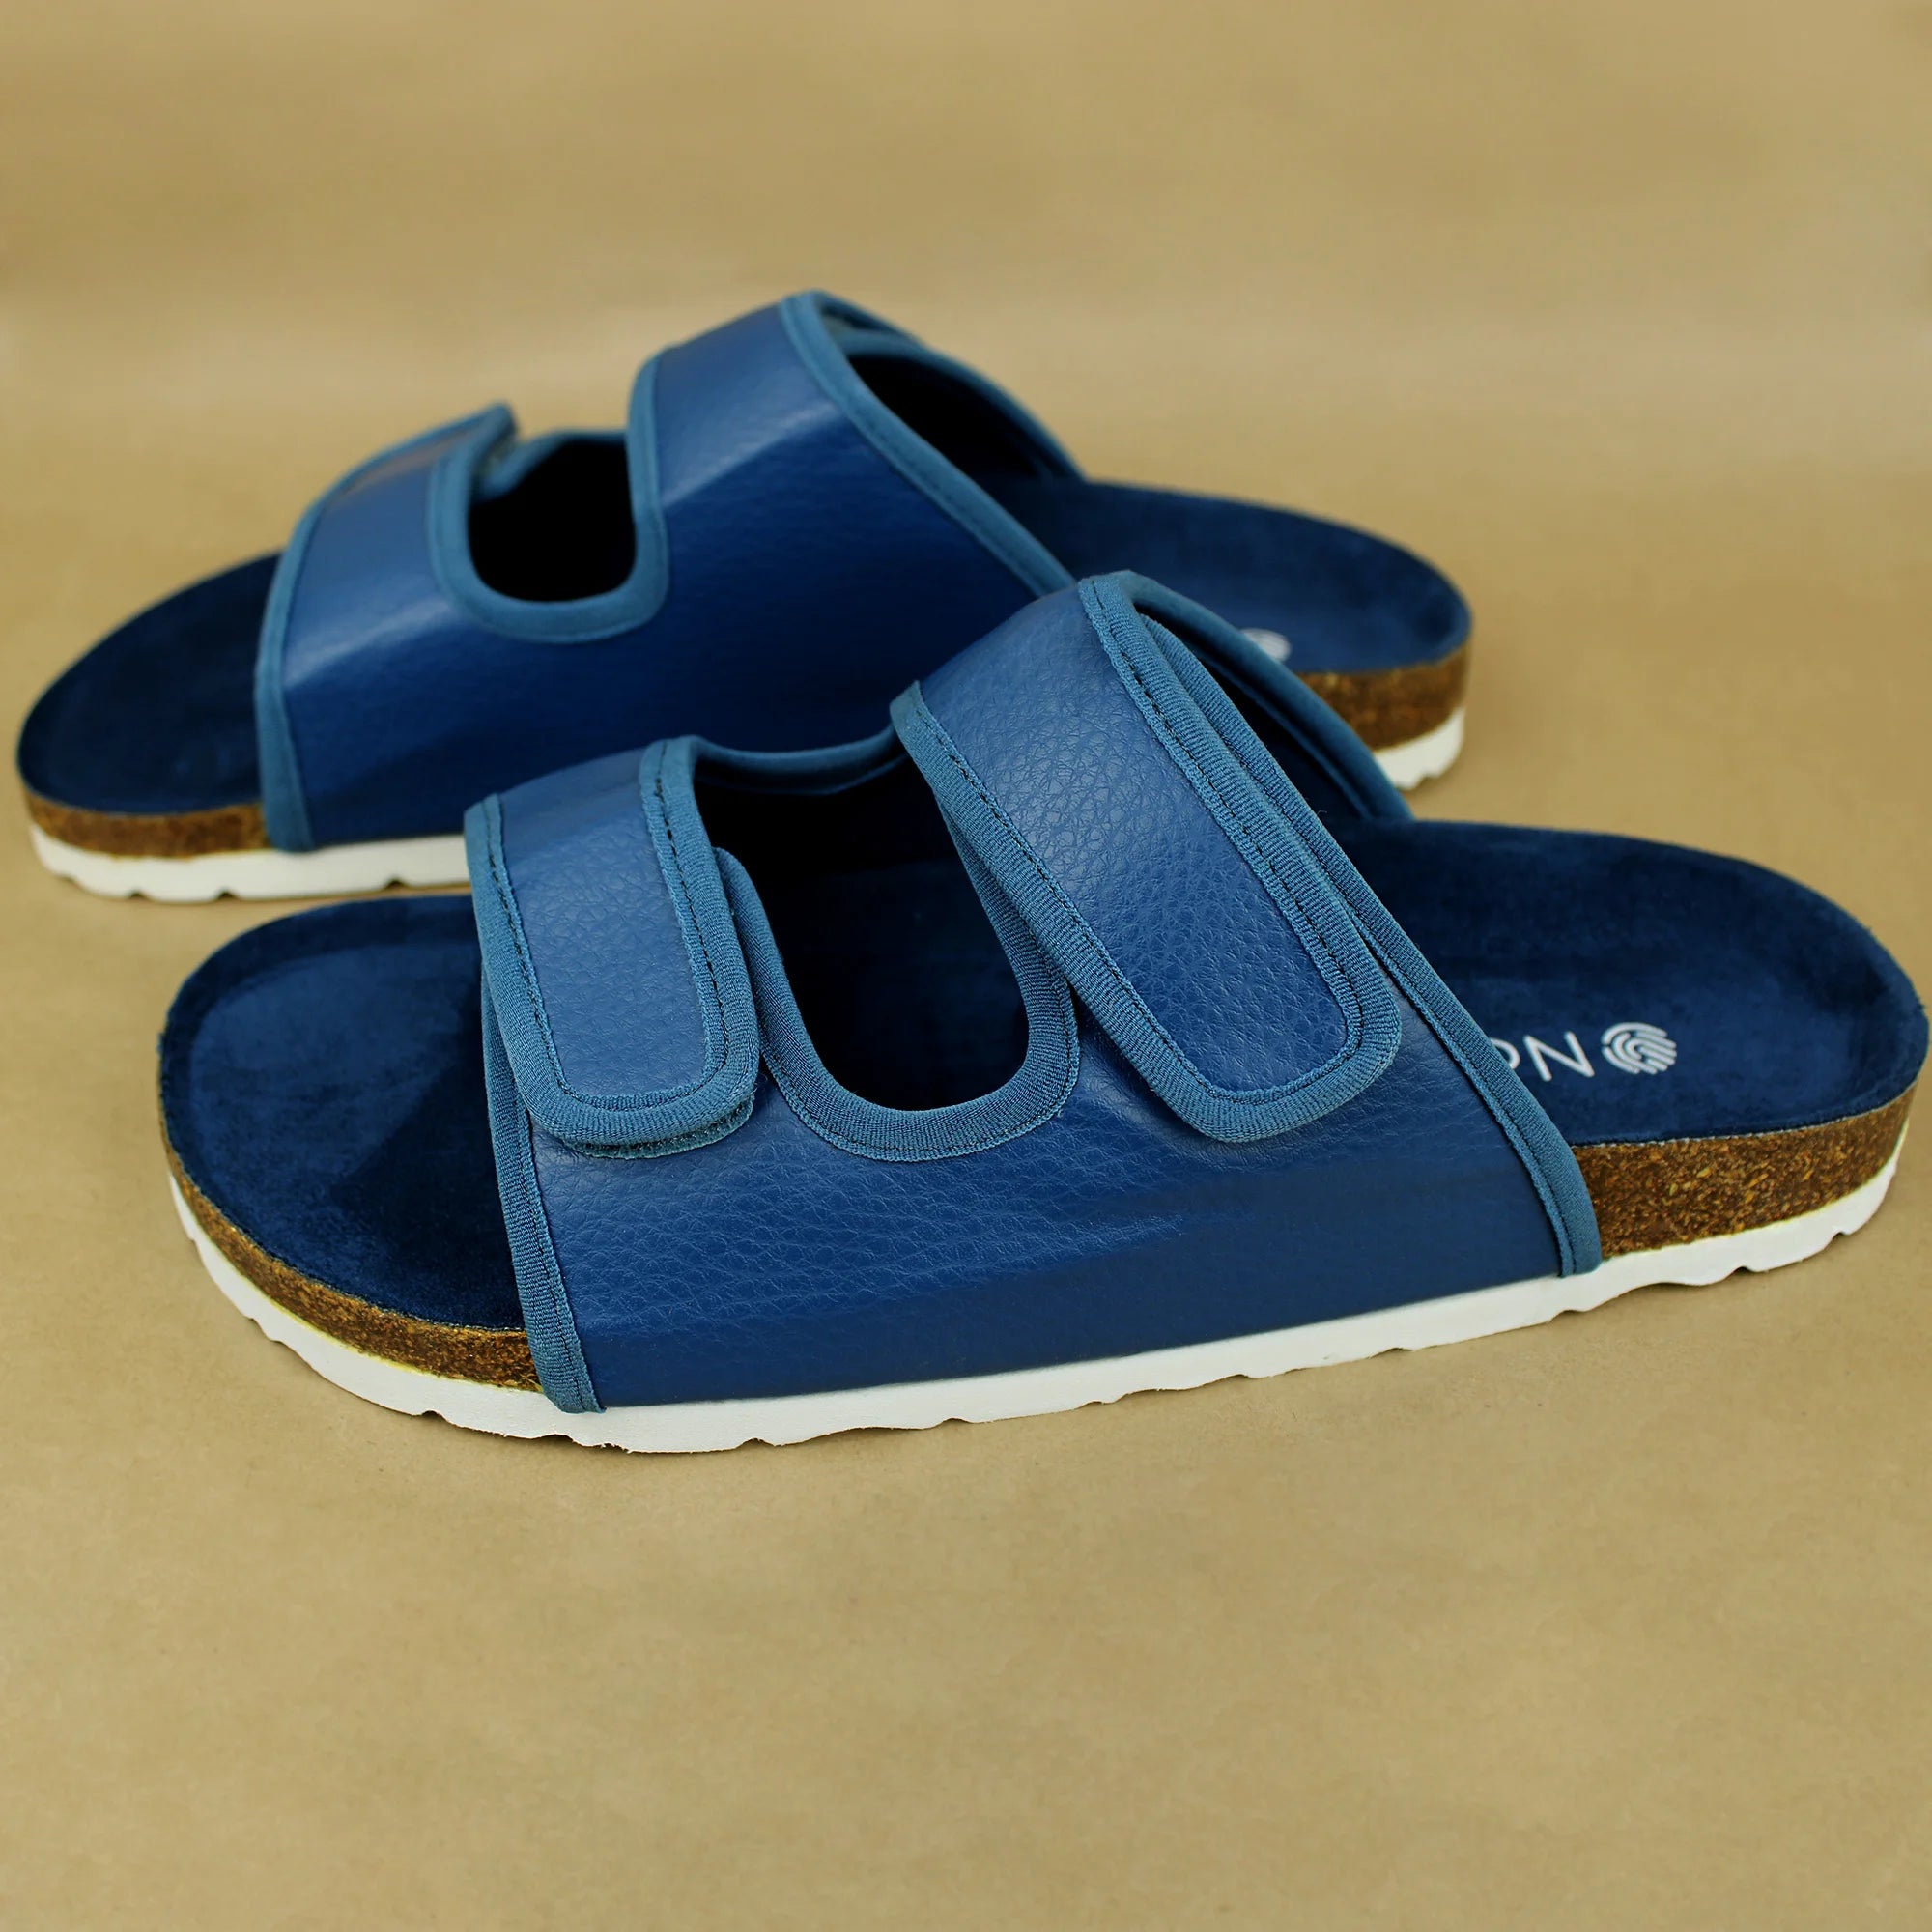 Cork Sandals in Wavy Navy: Stylish and Versatile Chappal for Men